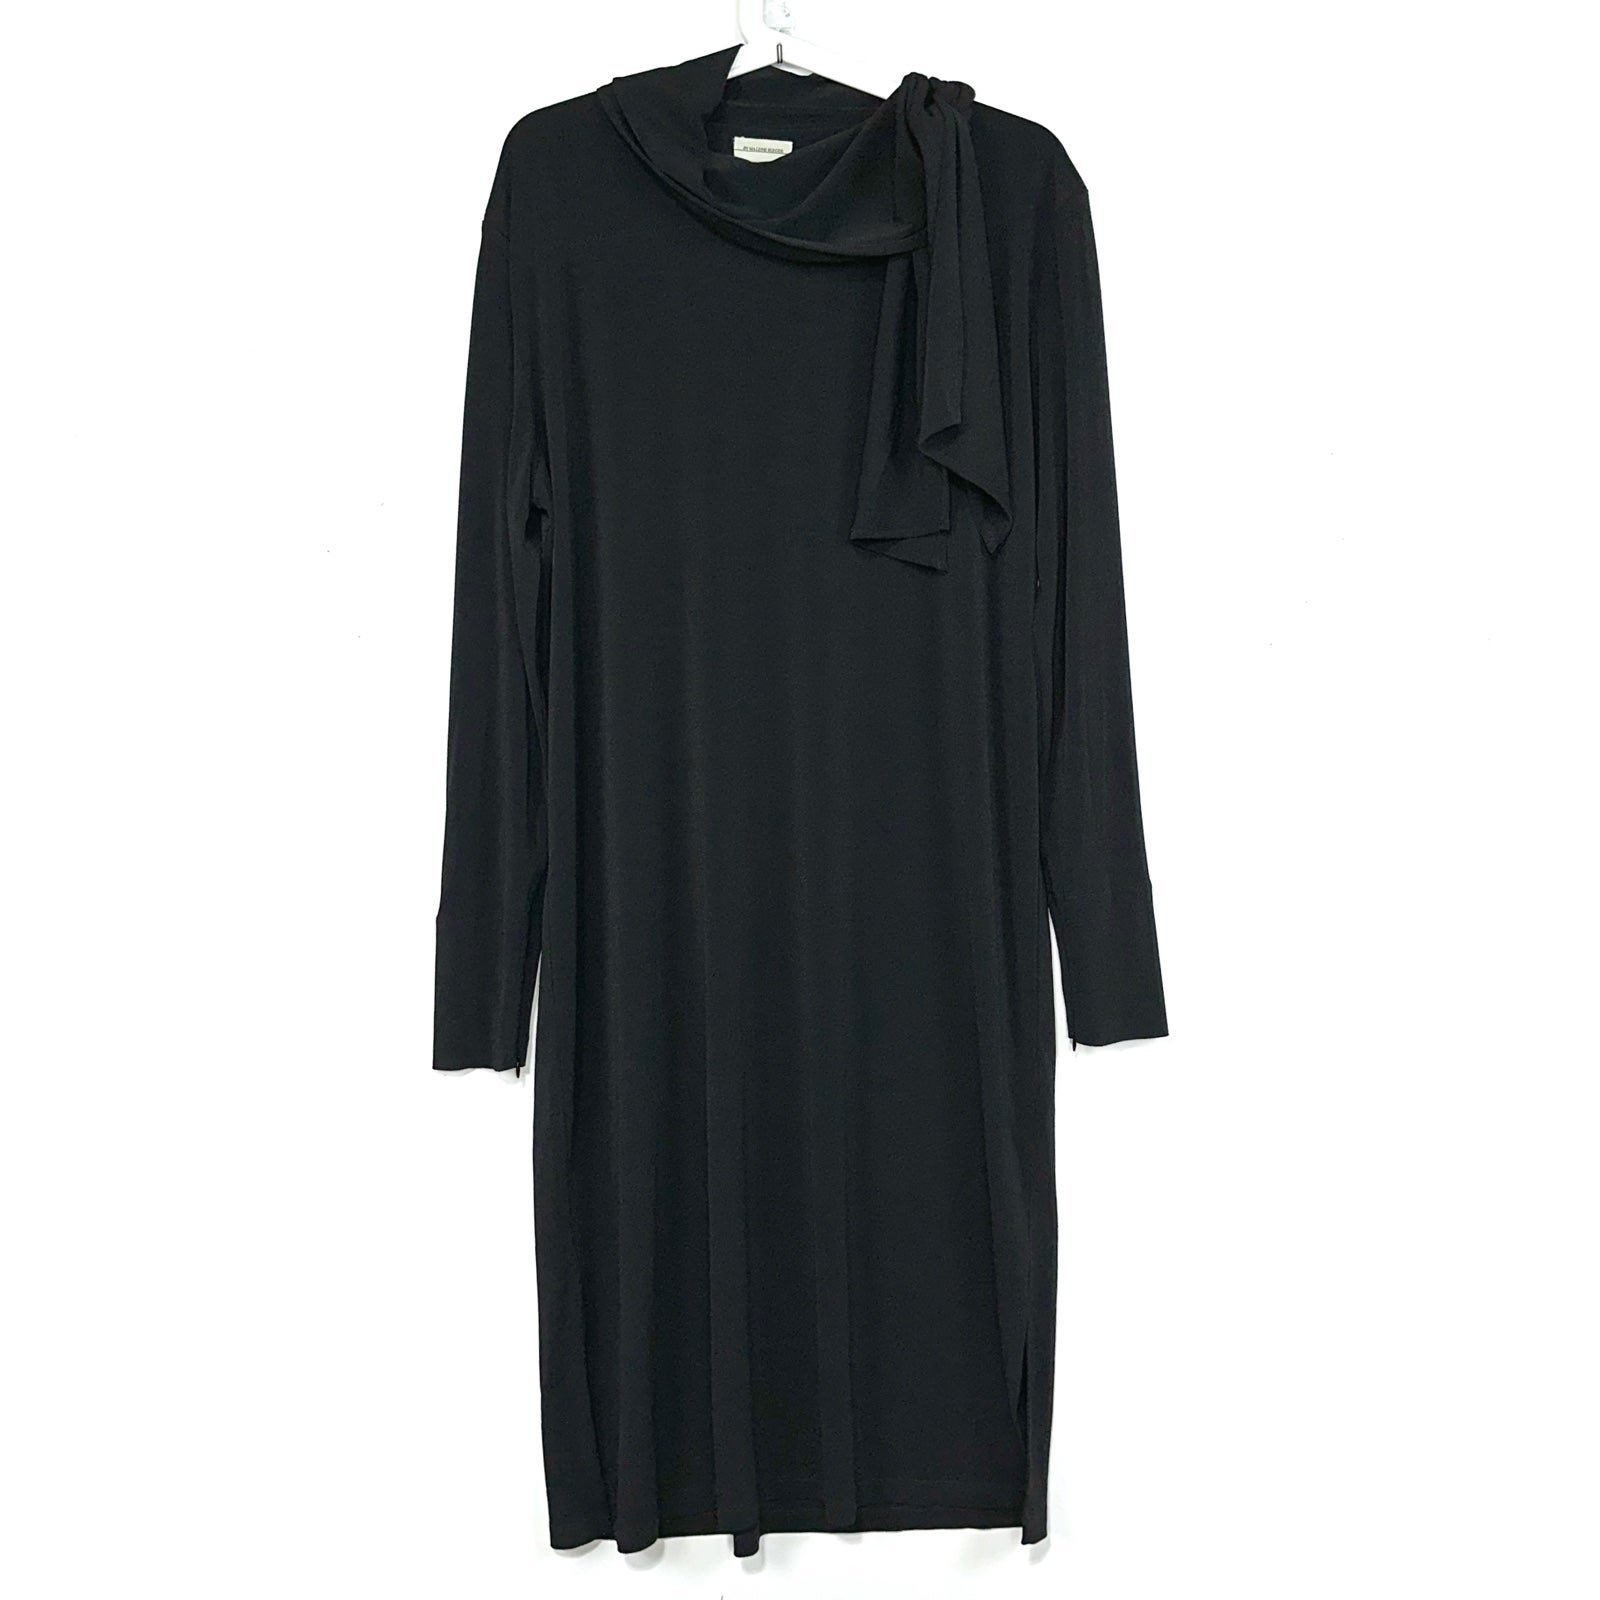 Comfortable By Malene Birger Gulia Black Long Sleeve Shift Dress  With Bow Tie Style Neck M hho82m4x9 no tax